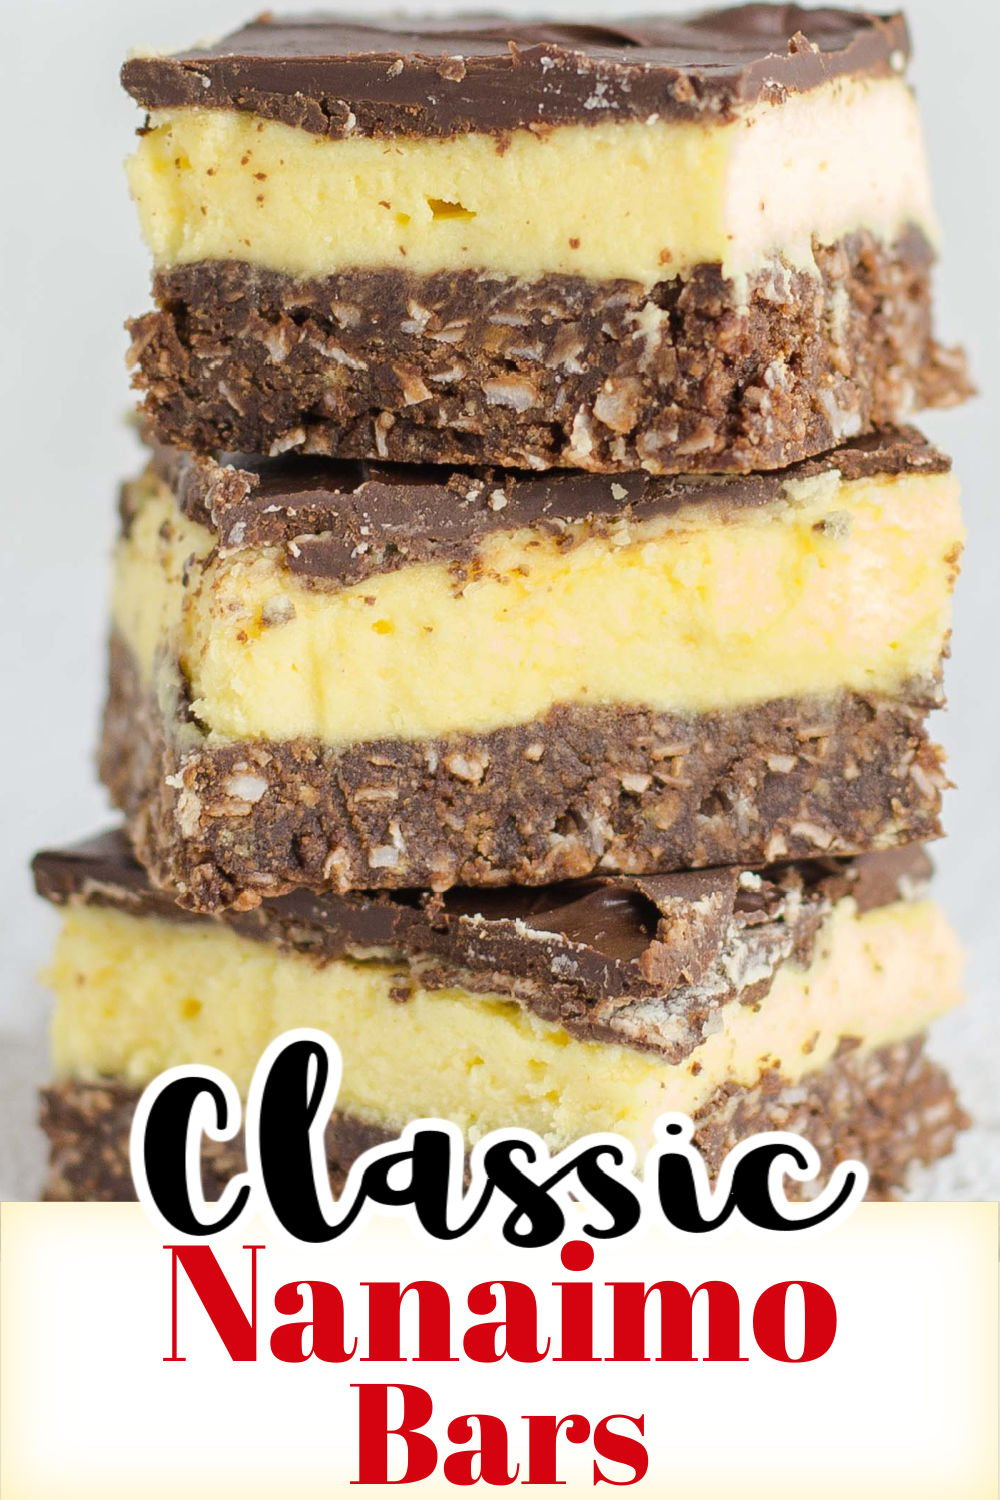 Stack of three bars with layers of chocolate coconut crumb crust, custard filling and chocolate coating.